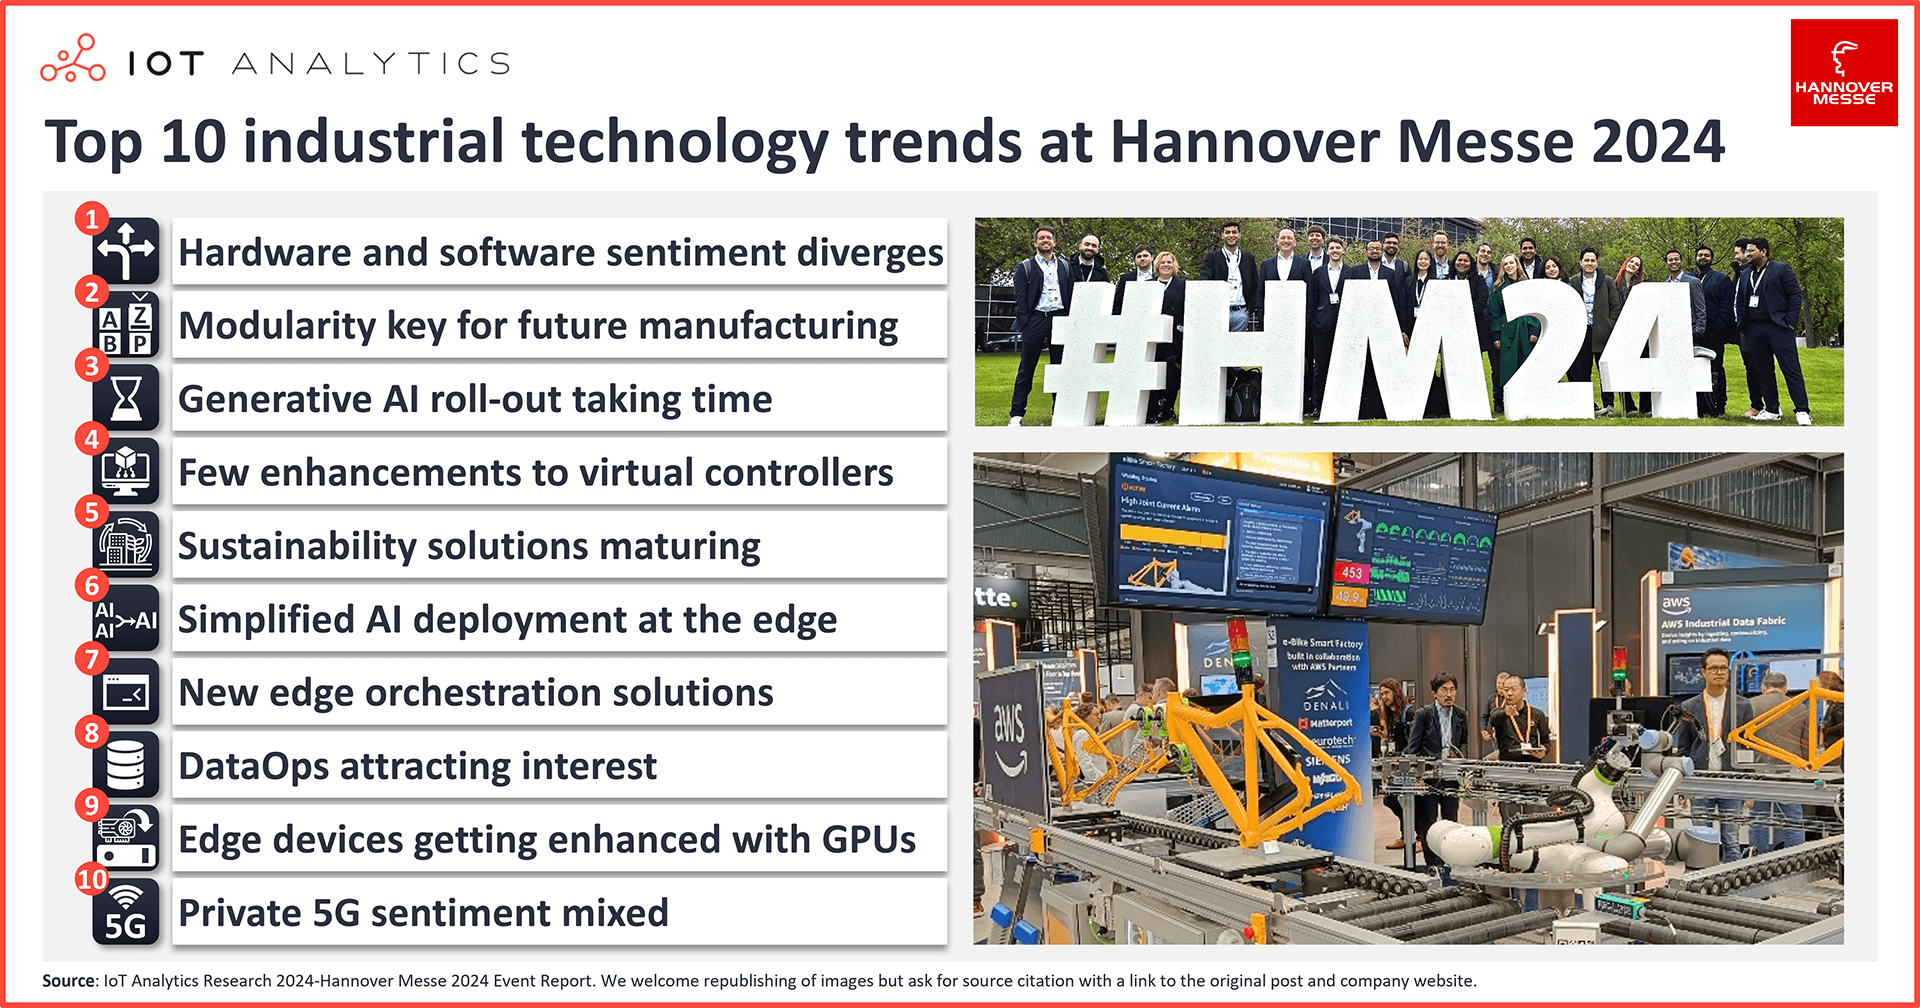 Top 10 industrial technology trends at Hannover Messe 2024